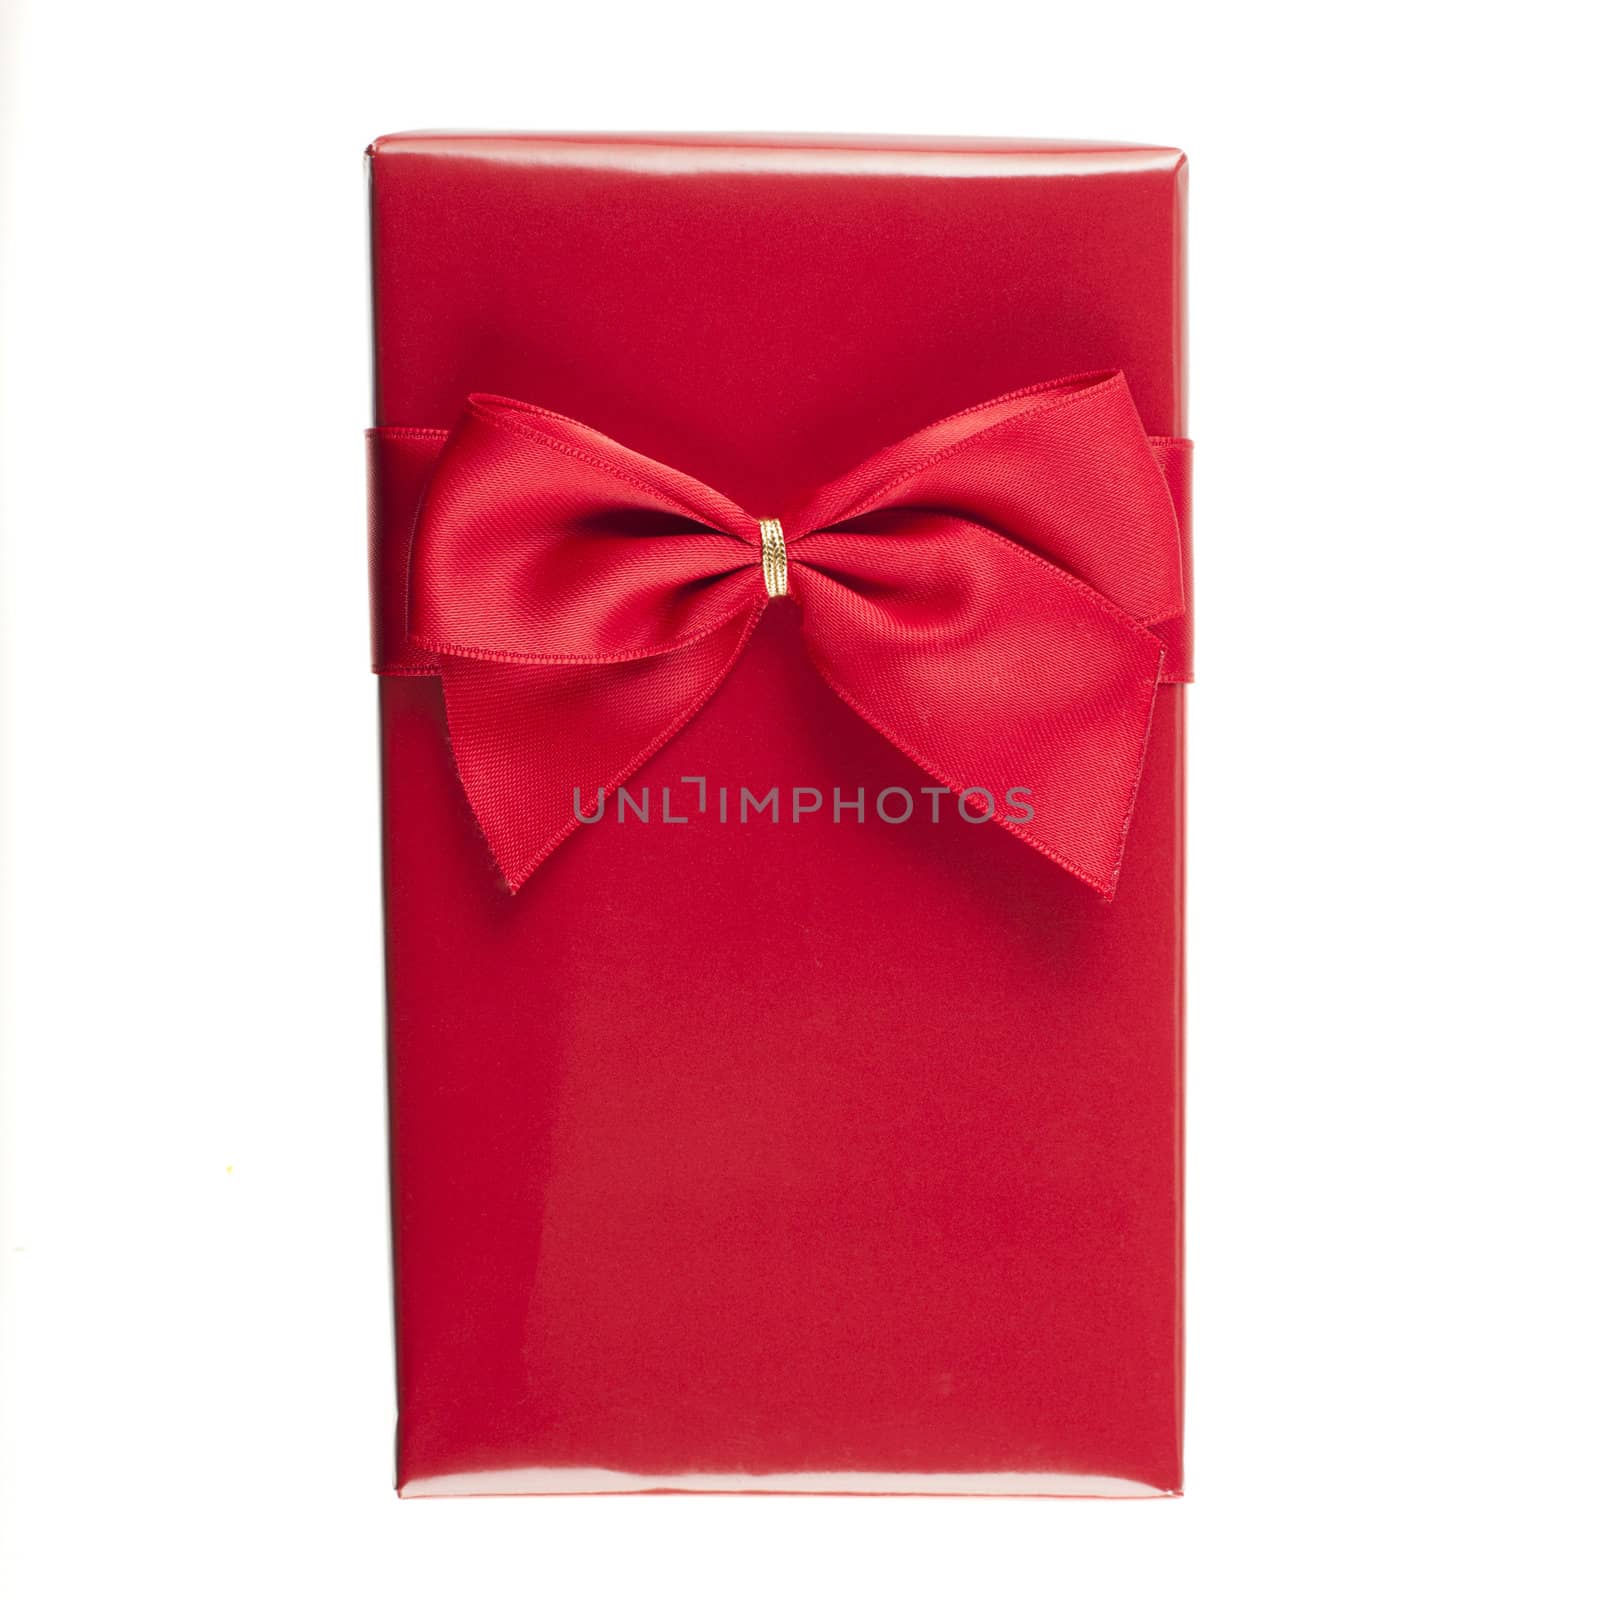 Gift wrapped with red paper and red ribbon in white background